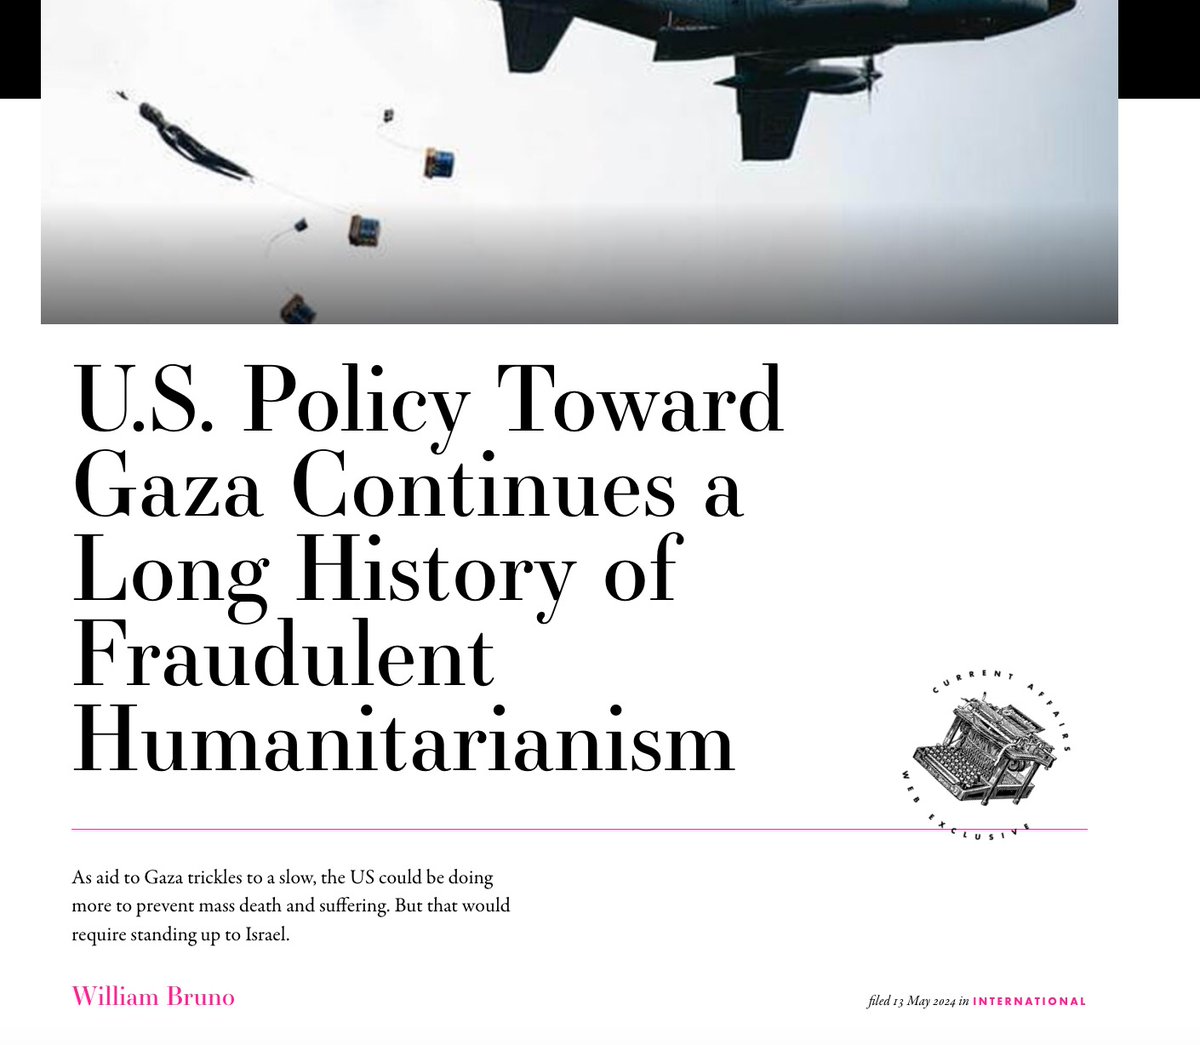 Today in Current Affairs: the US has a long history of professing humanitarian motives while in fact supporting oppression, and our policy toward Gaza is consistent with that precedent currentaffairs.org/2024/05/u-s-po…